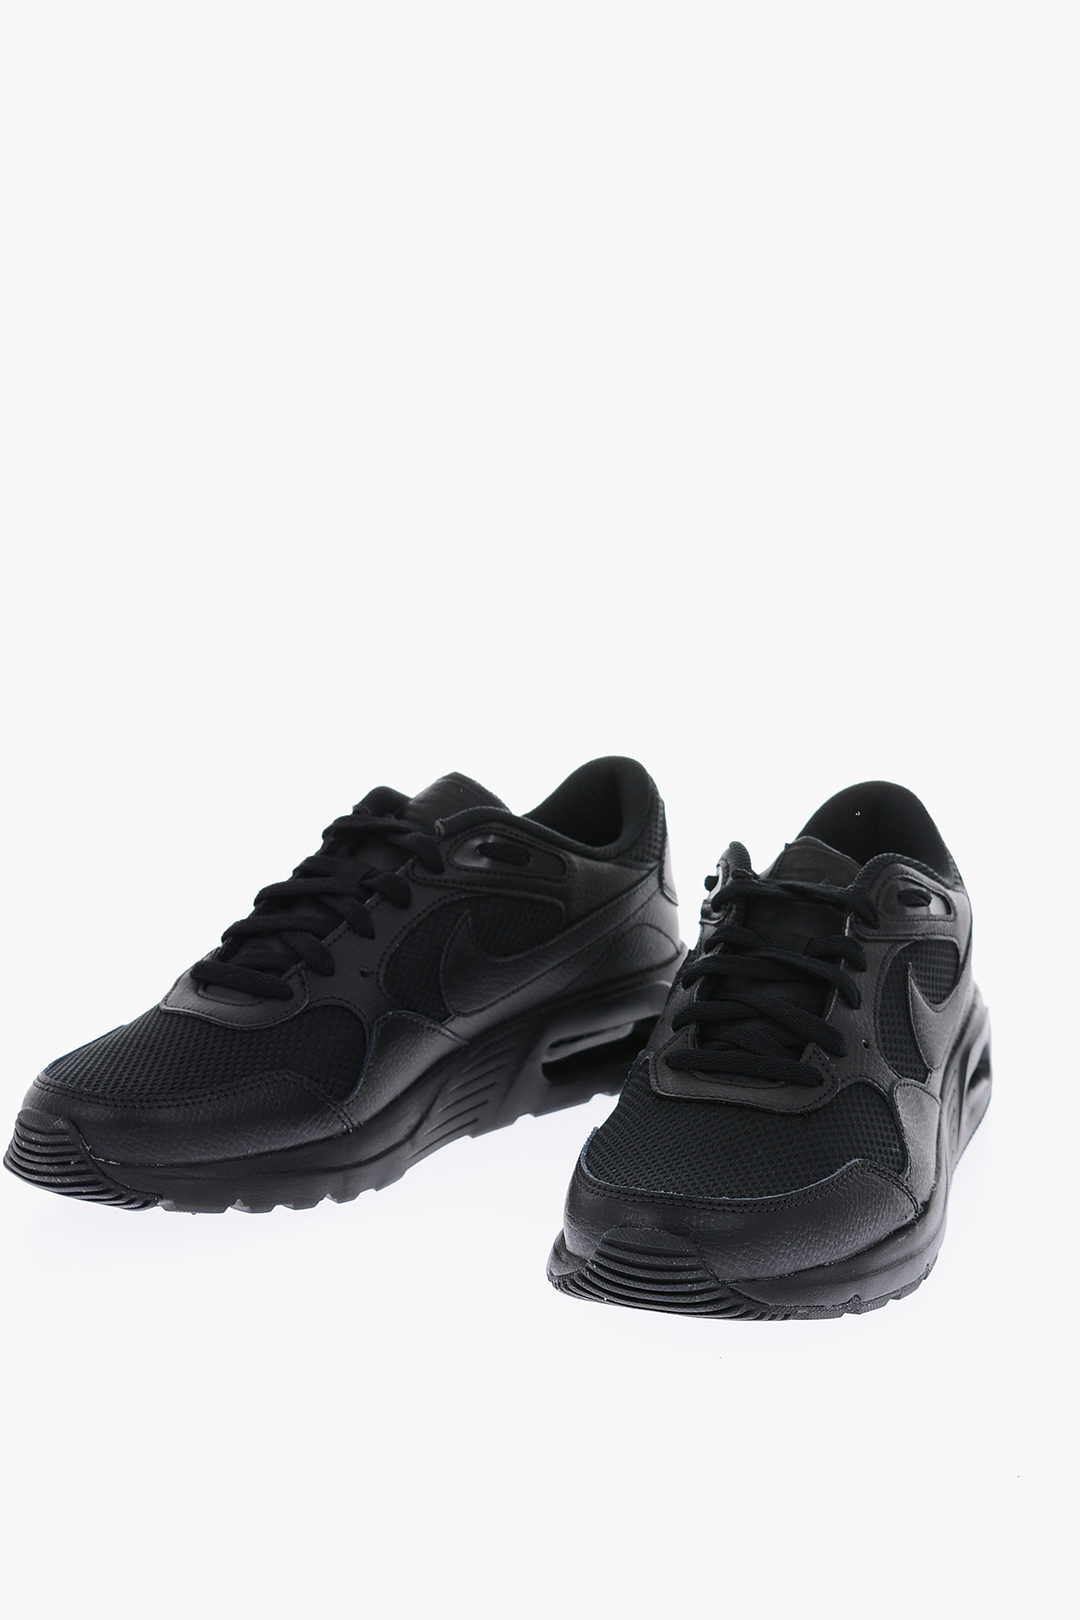 Nike Leather MAX SC Sneakers with Perforated men - Glamood Outlet